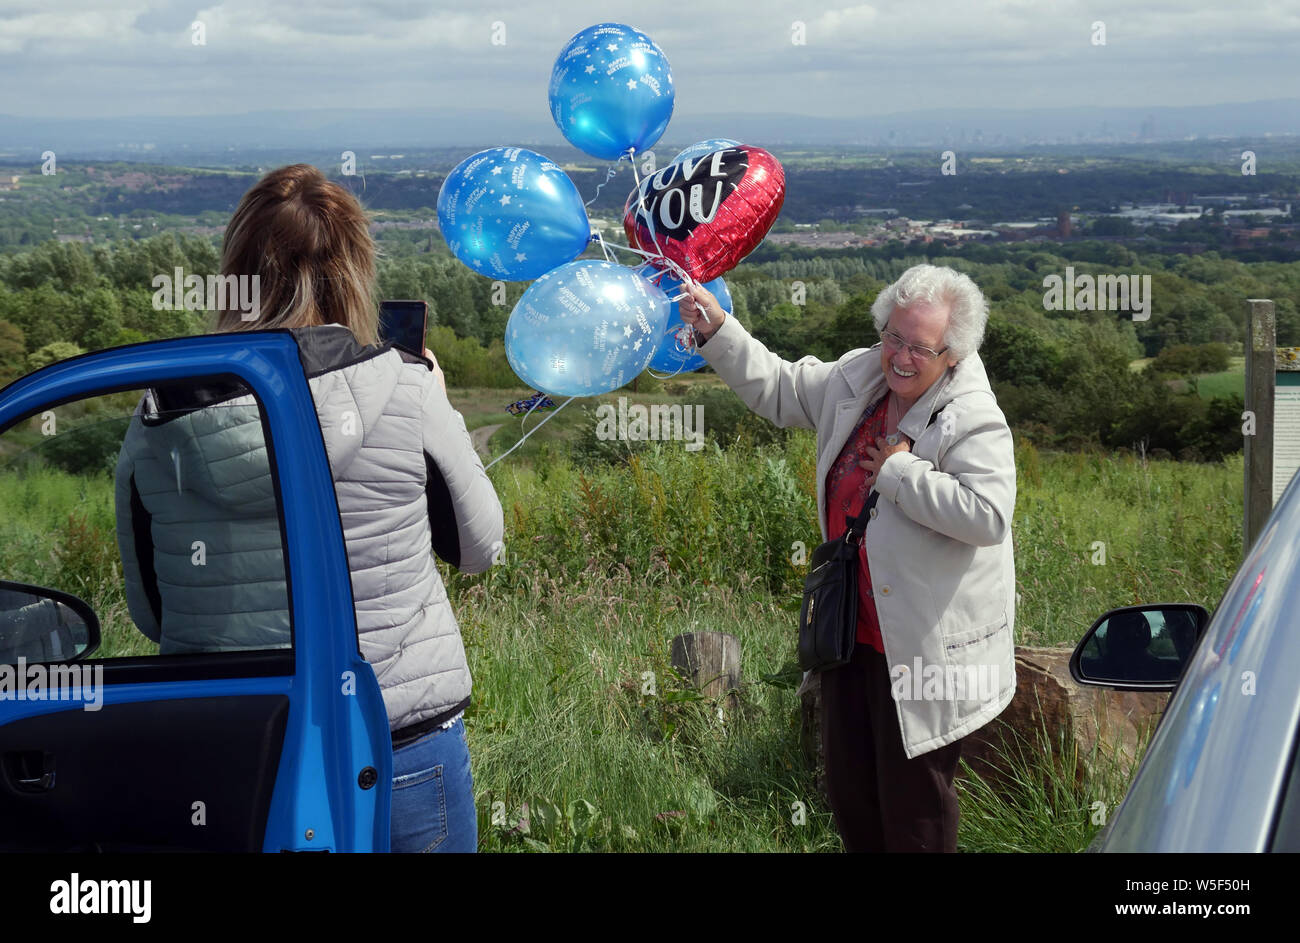 Elderly lady releasing balloons, one balloon is a heart shape saying “Love You” as a young lady records the event with her smart phone on a car park Stock Photo